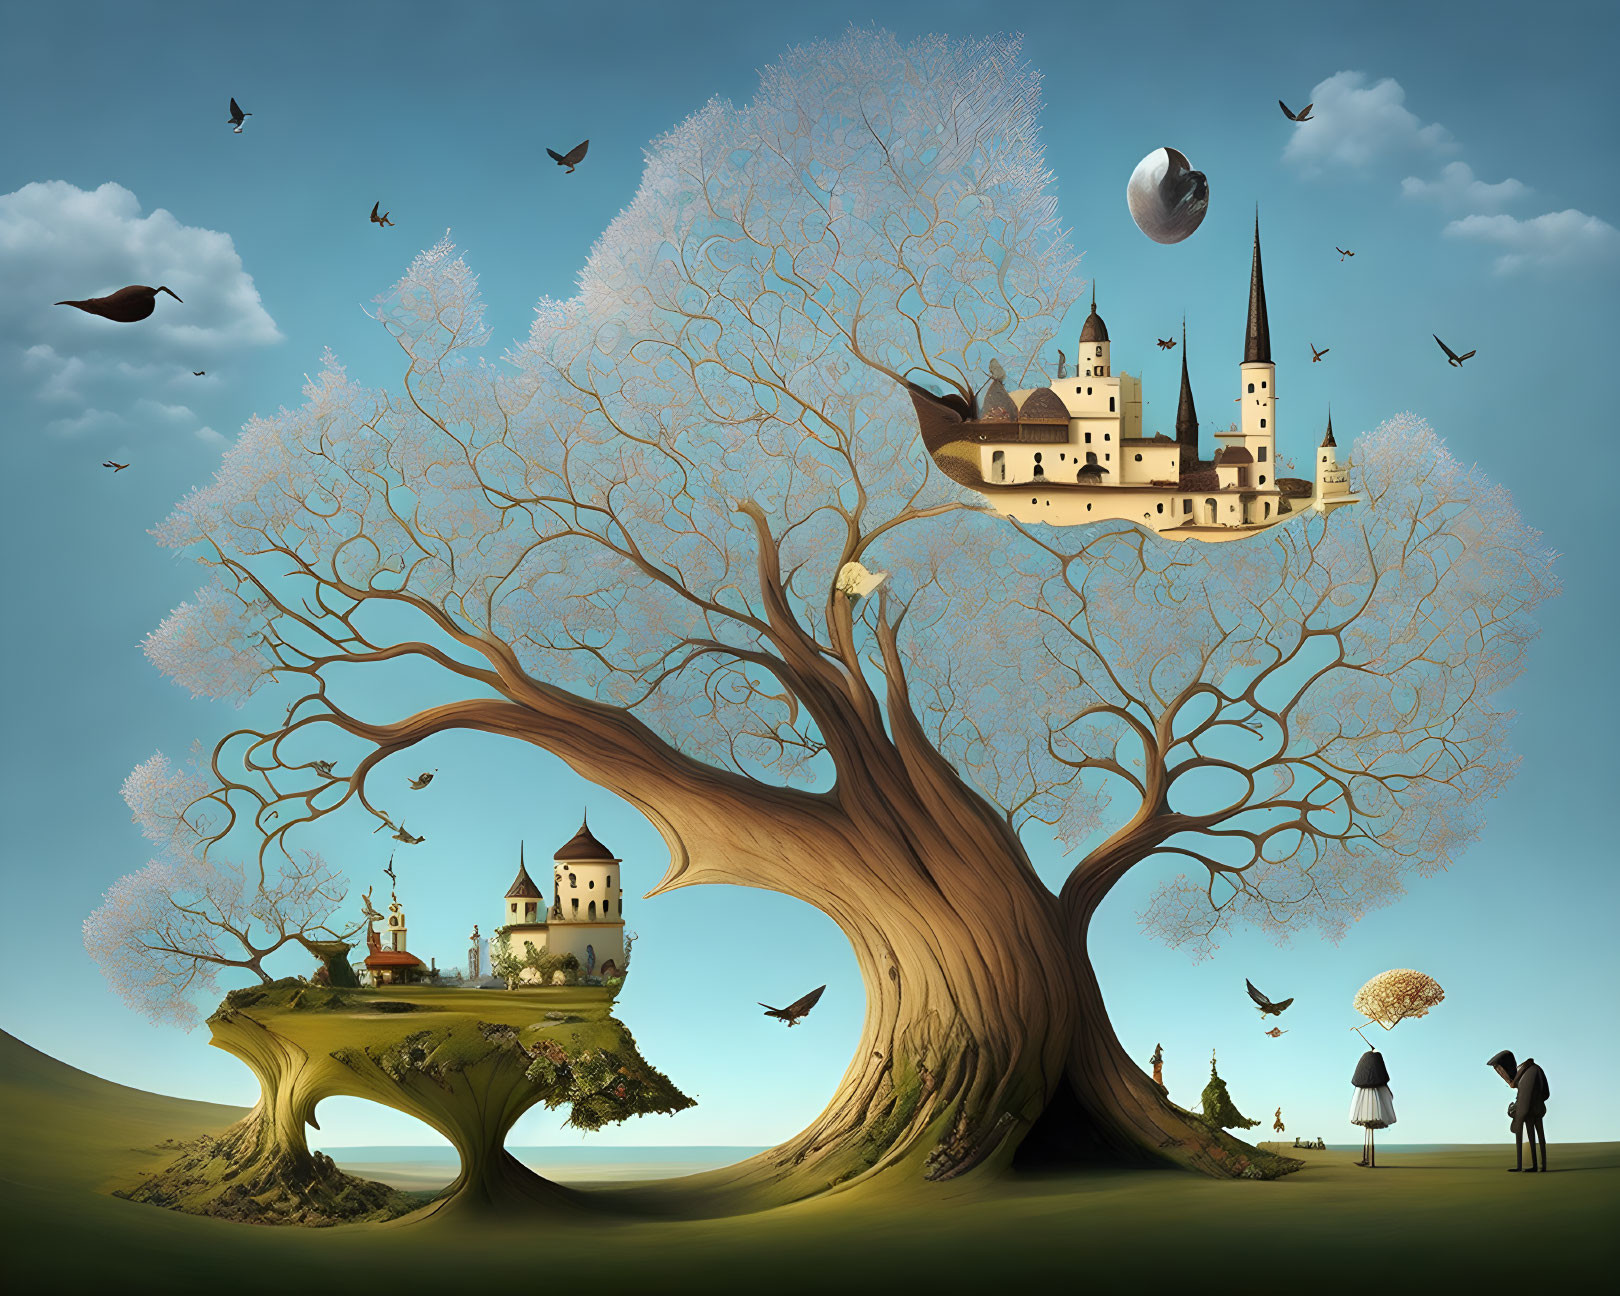 Fantasy artwork of giant tree with castles, birds, moon, and silhouettes